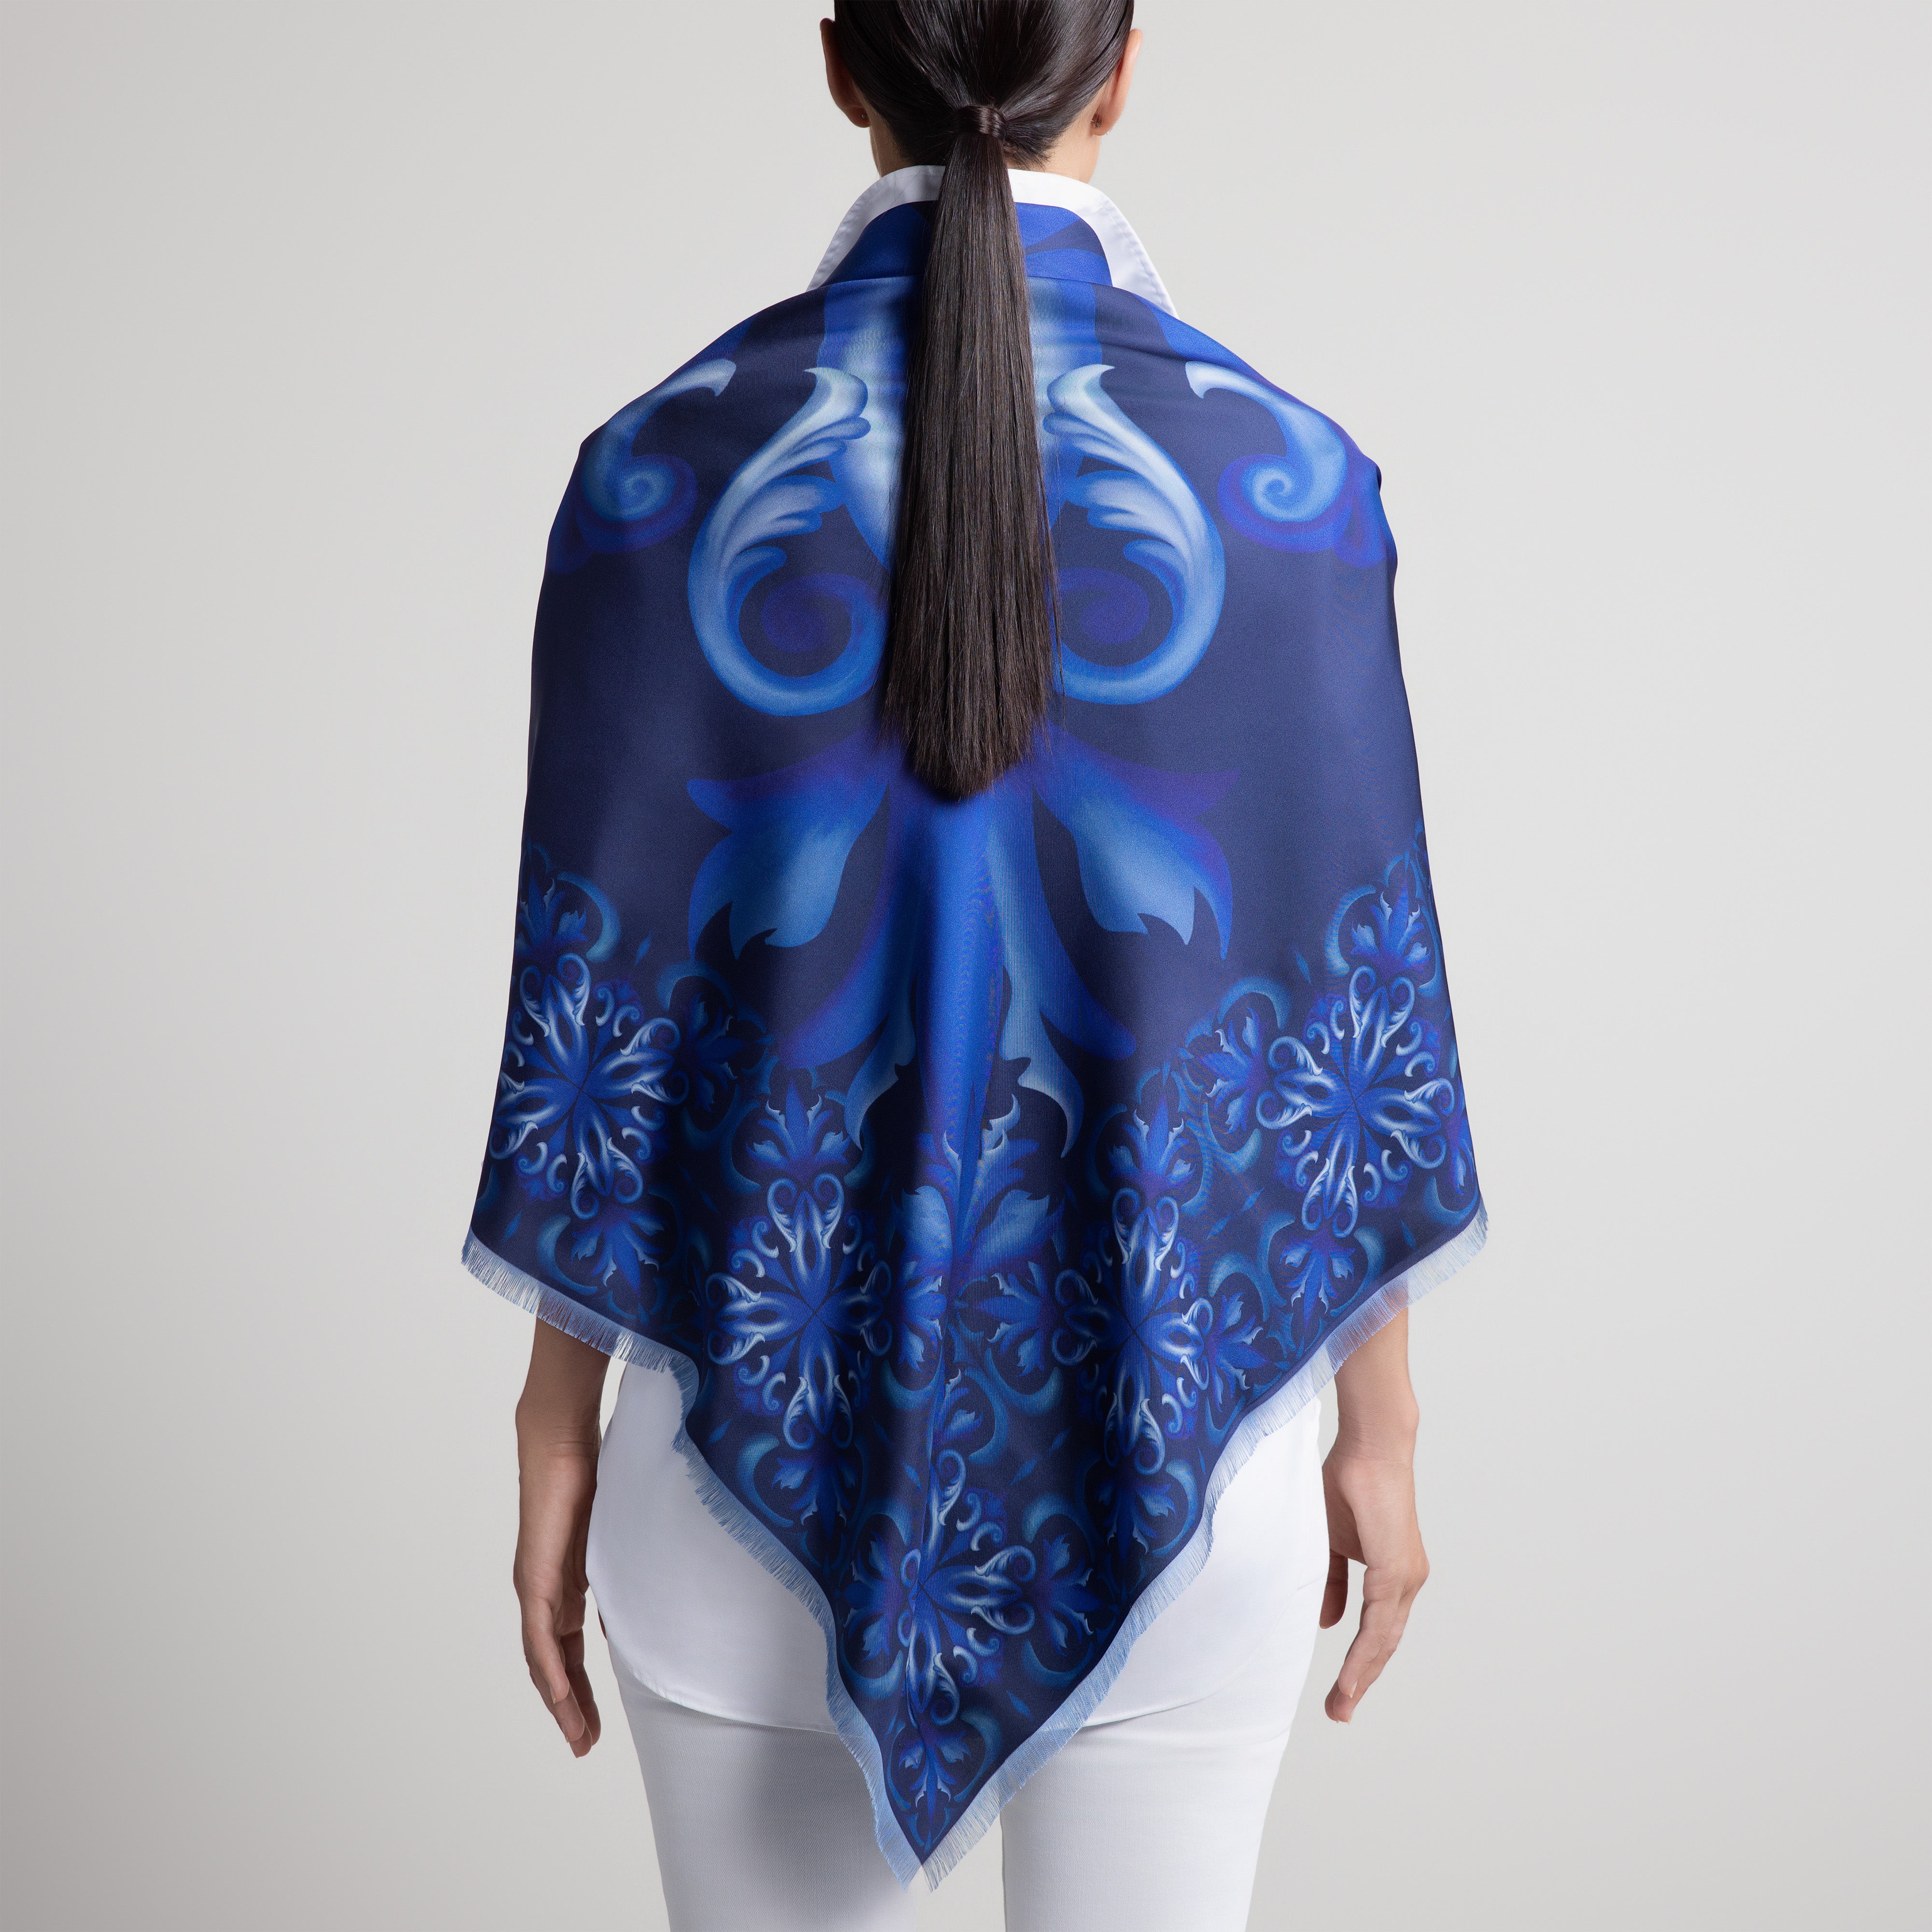 Porto Grande Silk Scarf in Navy Blue with Hand-Feathered Edges